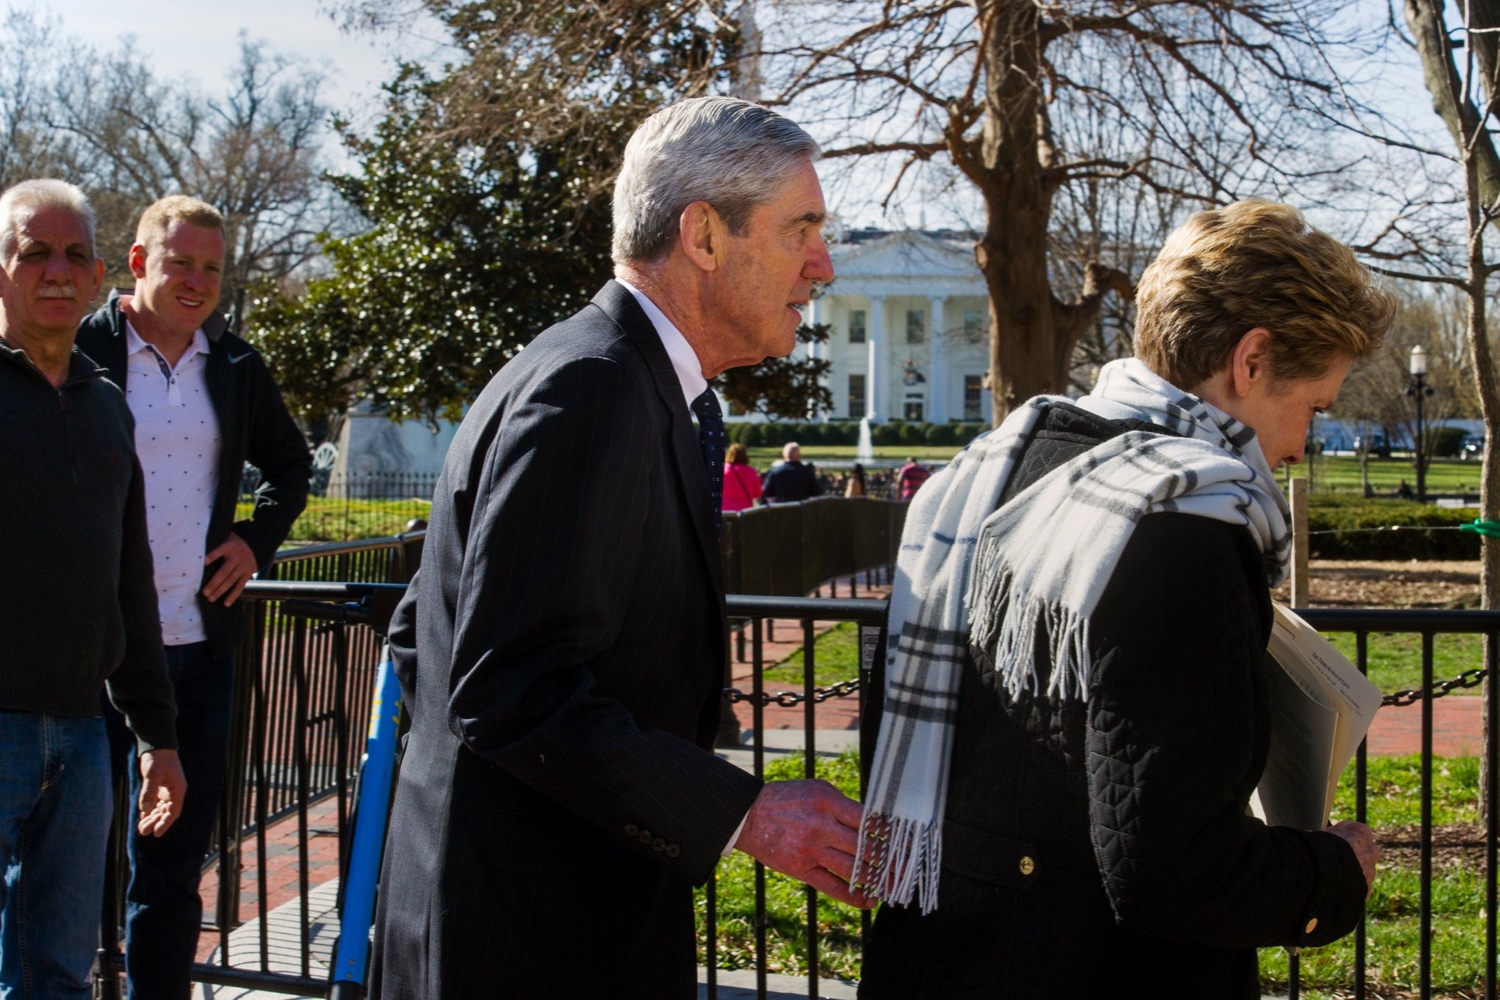 The special counsel, Robert S. Mueller III, and his wife, Ann, walk near the White House after attending church on Sunday.CreditCreditCliff Owen/Associated Press